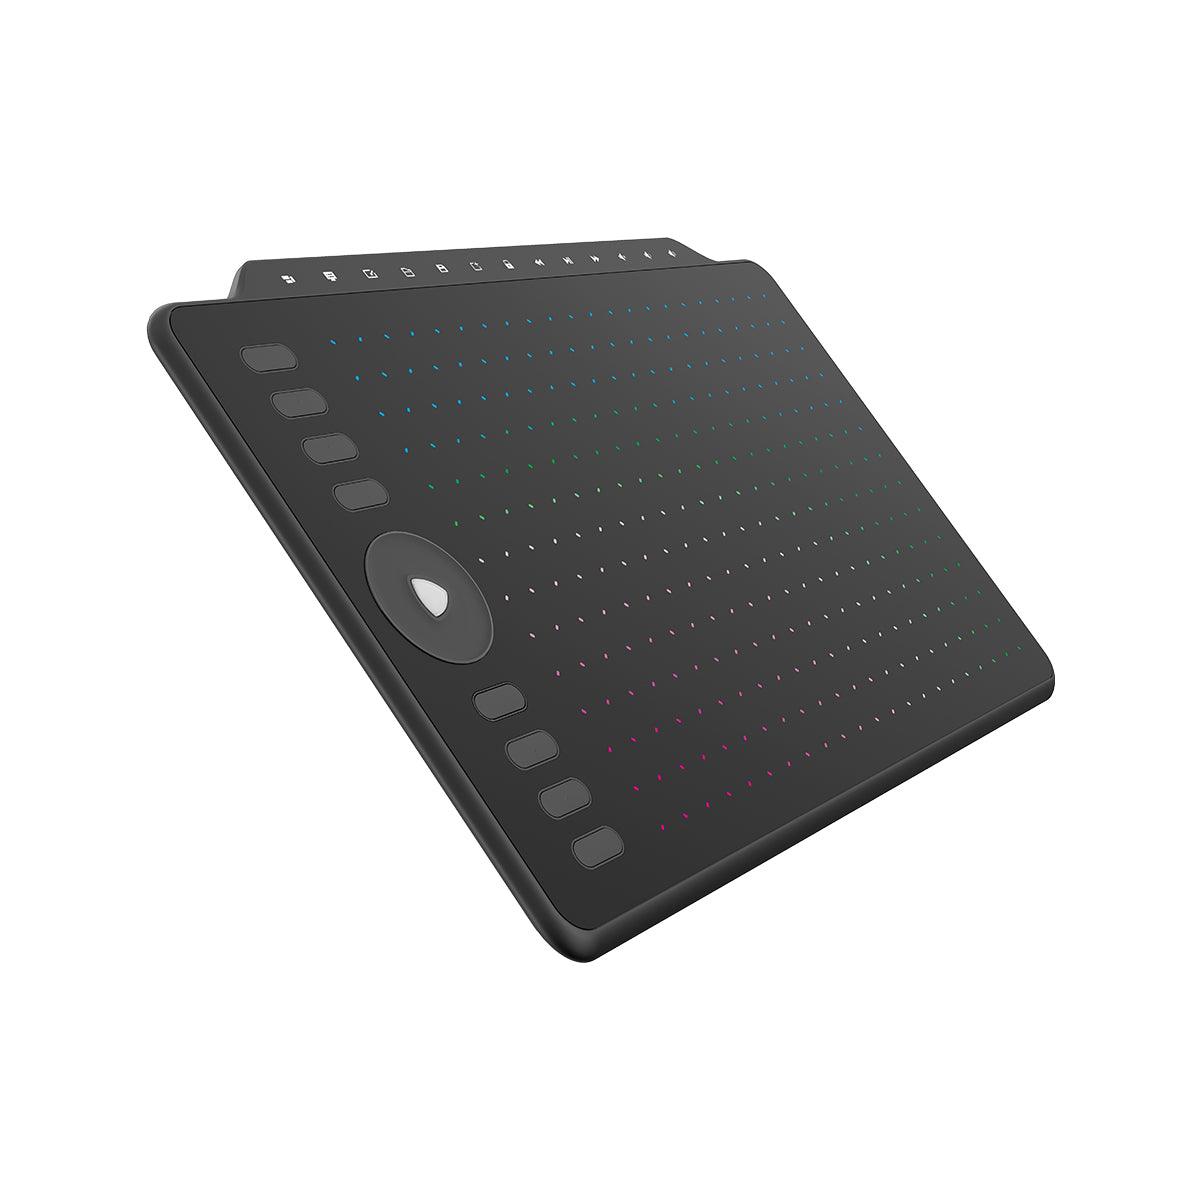 GAOMON PD1610 2.5K QHD Graphics Drawing Tablet with 16:10 Screen